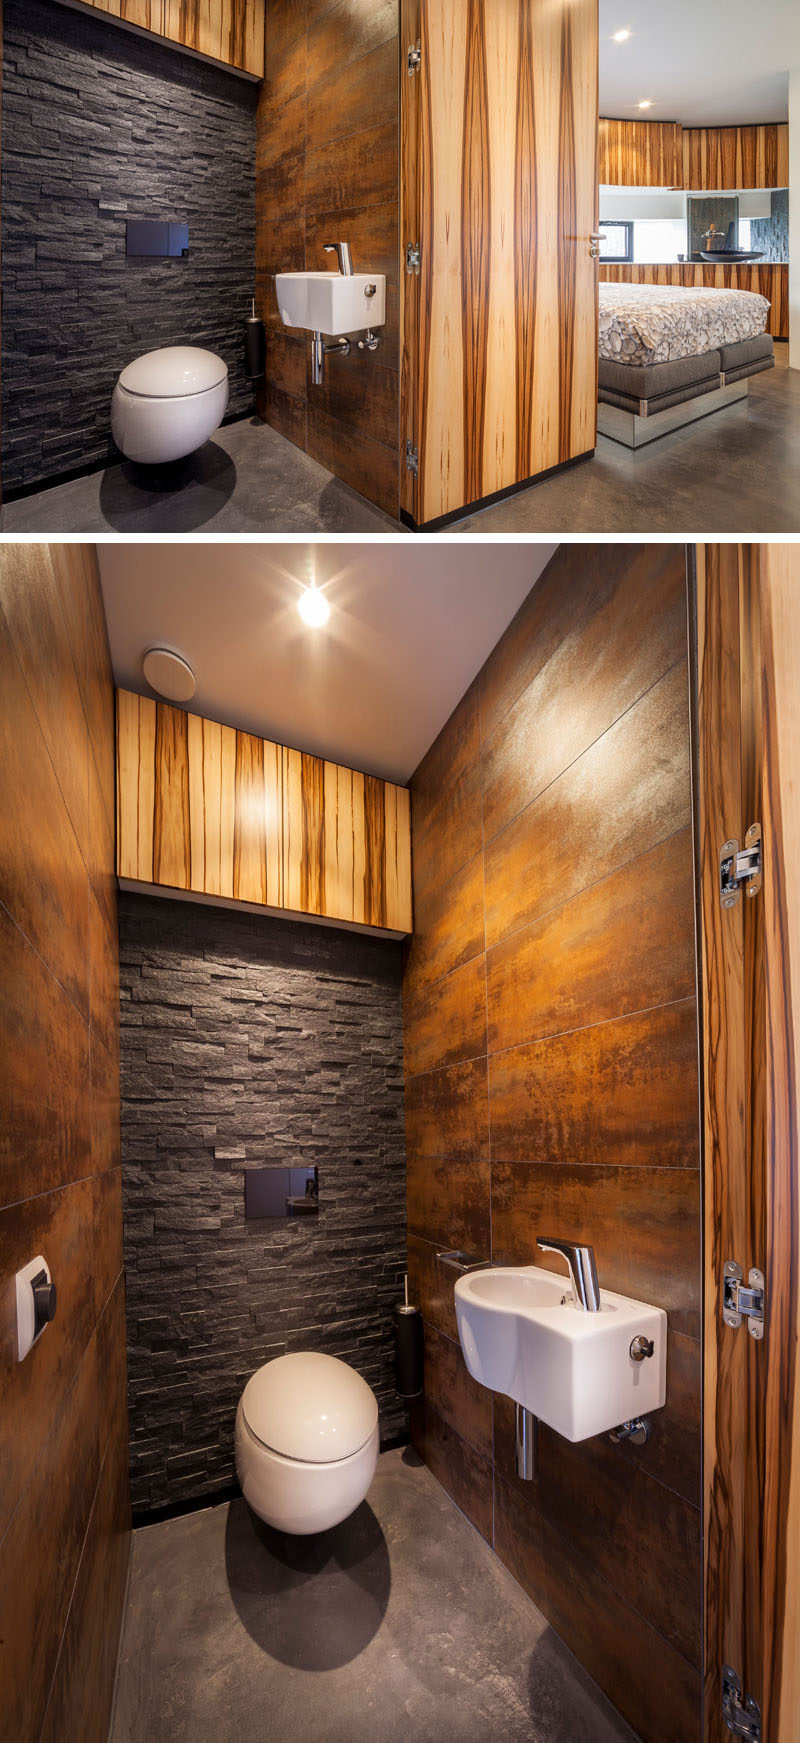 This small bathroom features metal, wood and stone walls, and a door made from the same wood material used to cover the walls of the home allows the bathroom to disappear from sight when the door is closed.